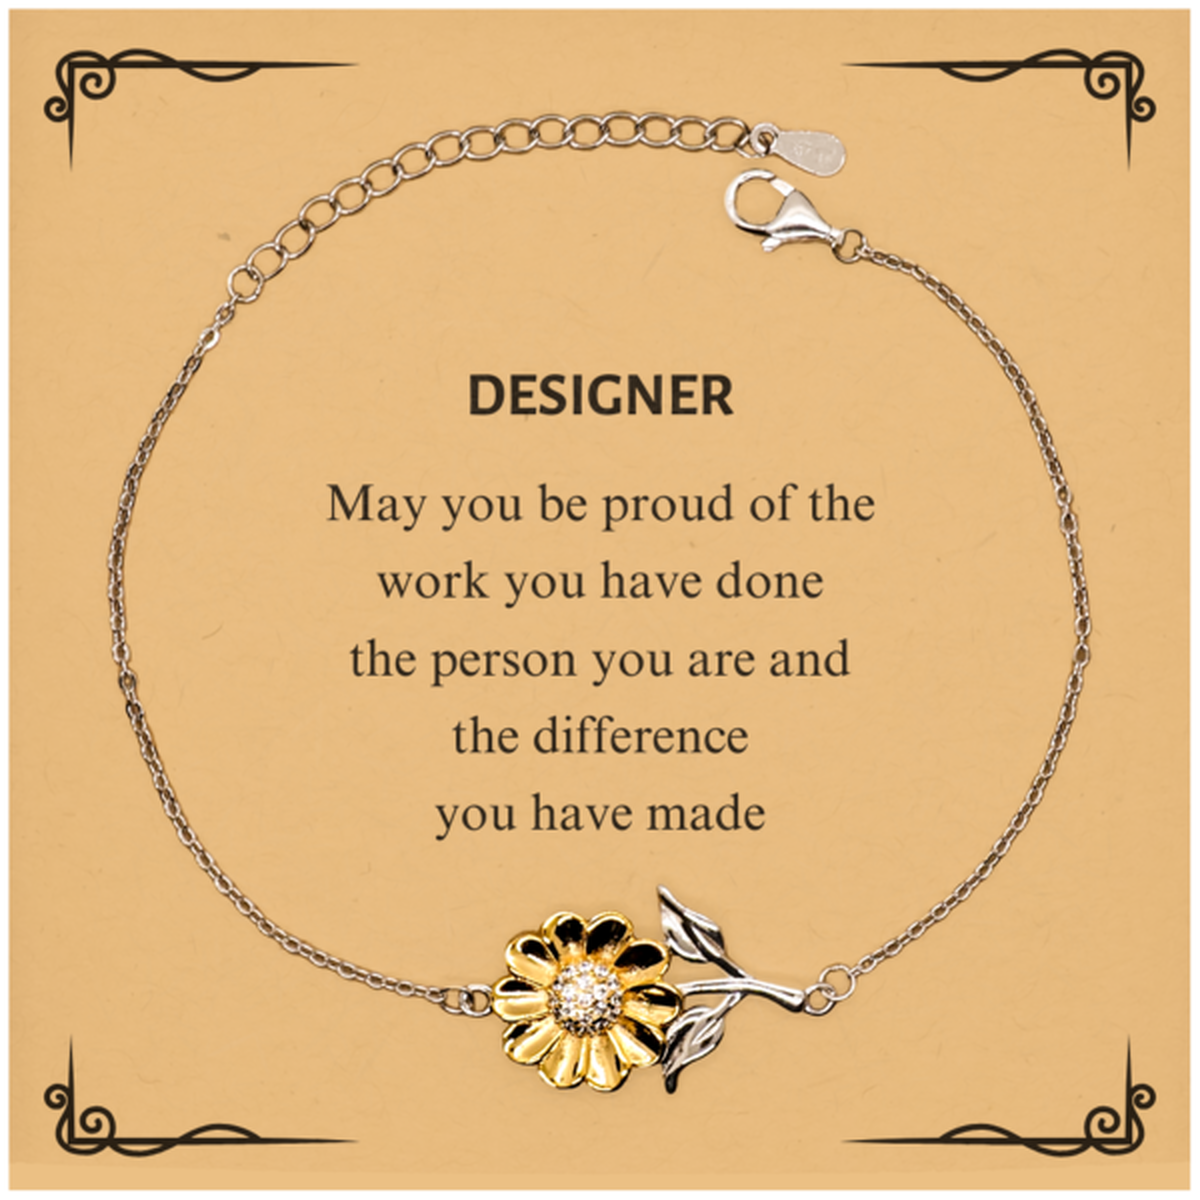 Designer May you be proud of the work you have done, Retirement Designer Sunflower Bracelet for Colleague Appreciation Gifts Amazing for Designer